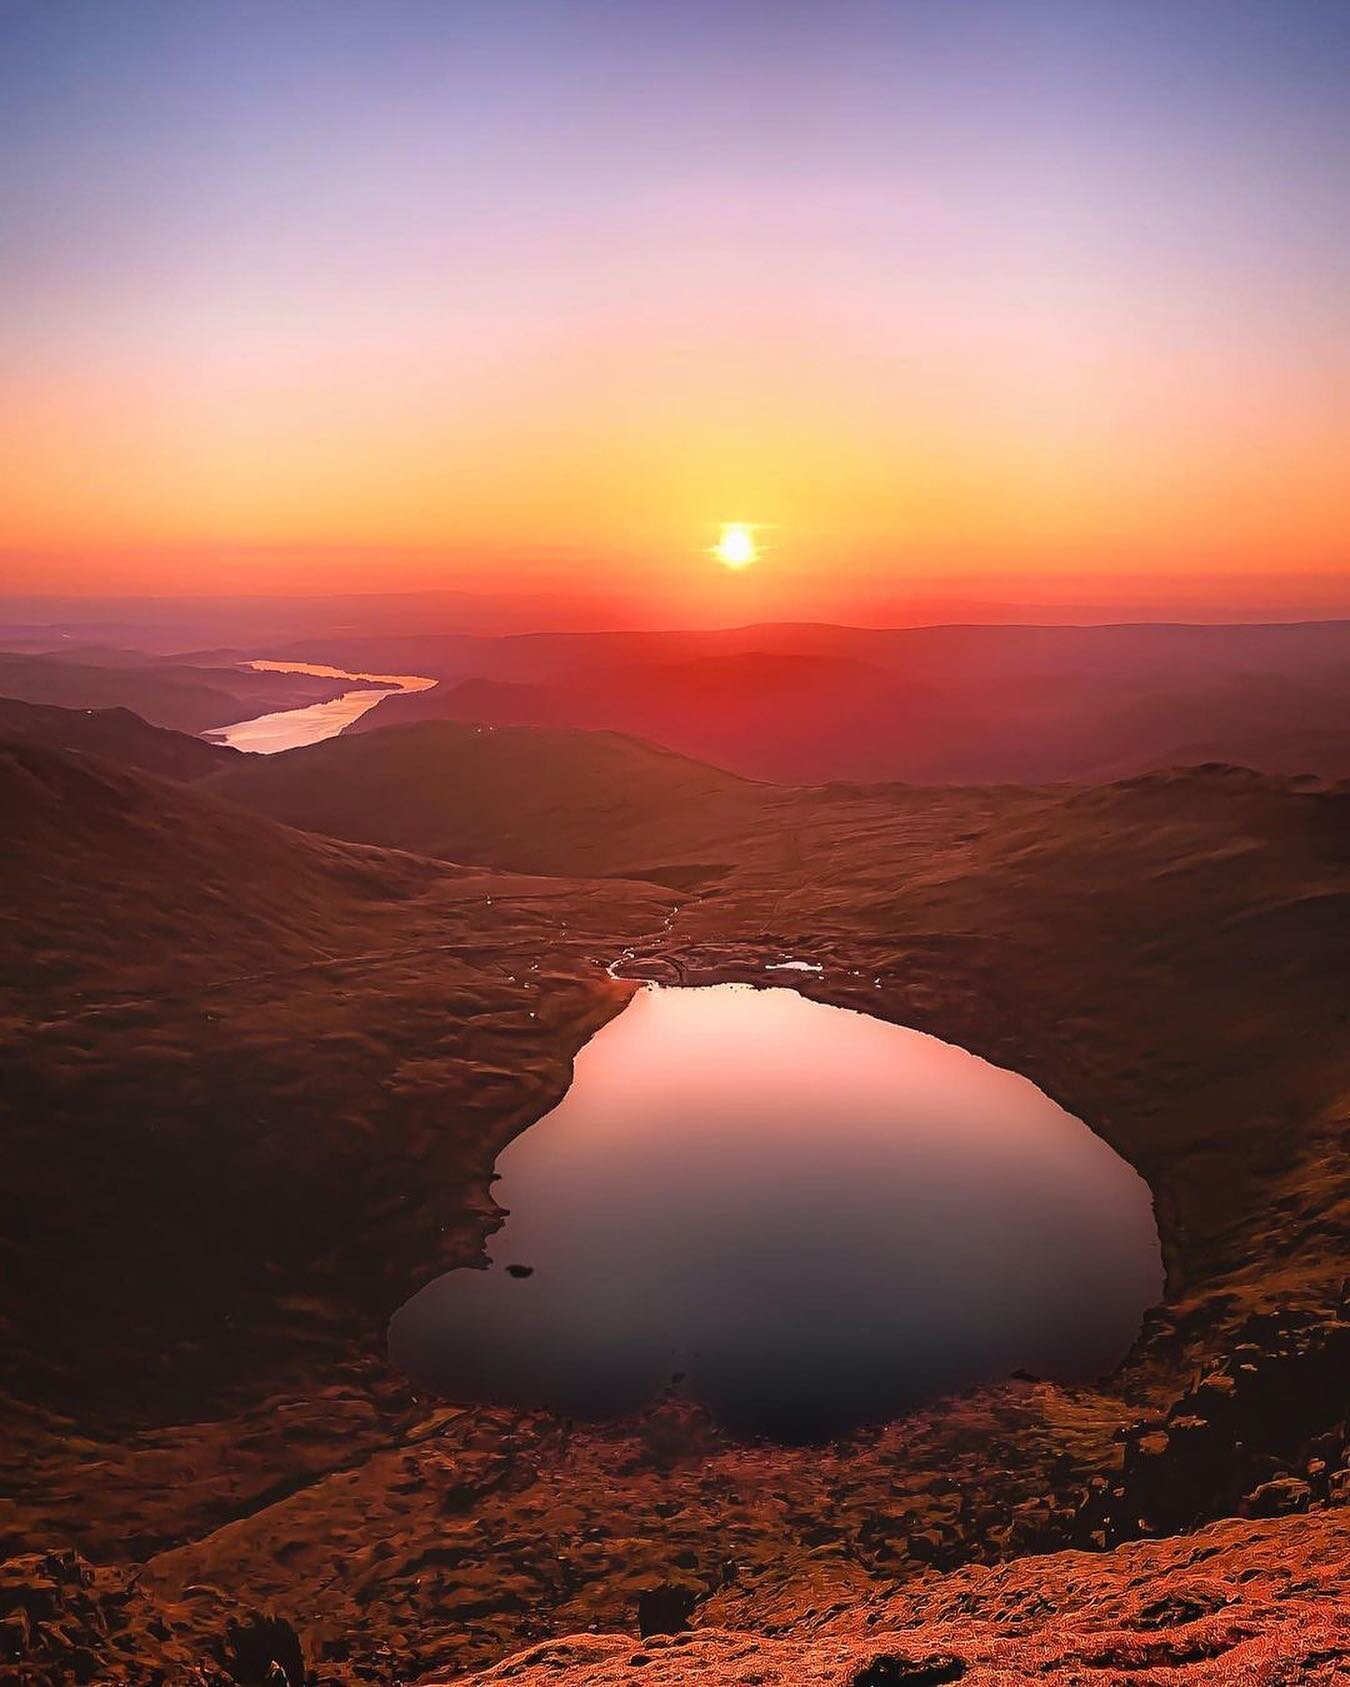 Happy hump day from the Lake District! 

@adventure_steve_hikes 📸❤️

#lakes #lakedistrict #cumbria #sunsetlovers #sunrise_and_sunsets #golden #camper #backpacker #backpacking  #liveinthemoment #hikinglife #adventureawaits #exploringtheglobe 
#outsid